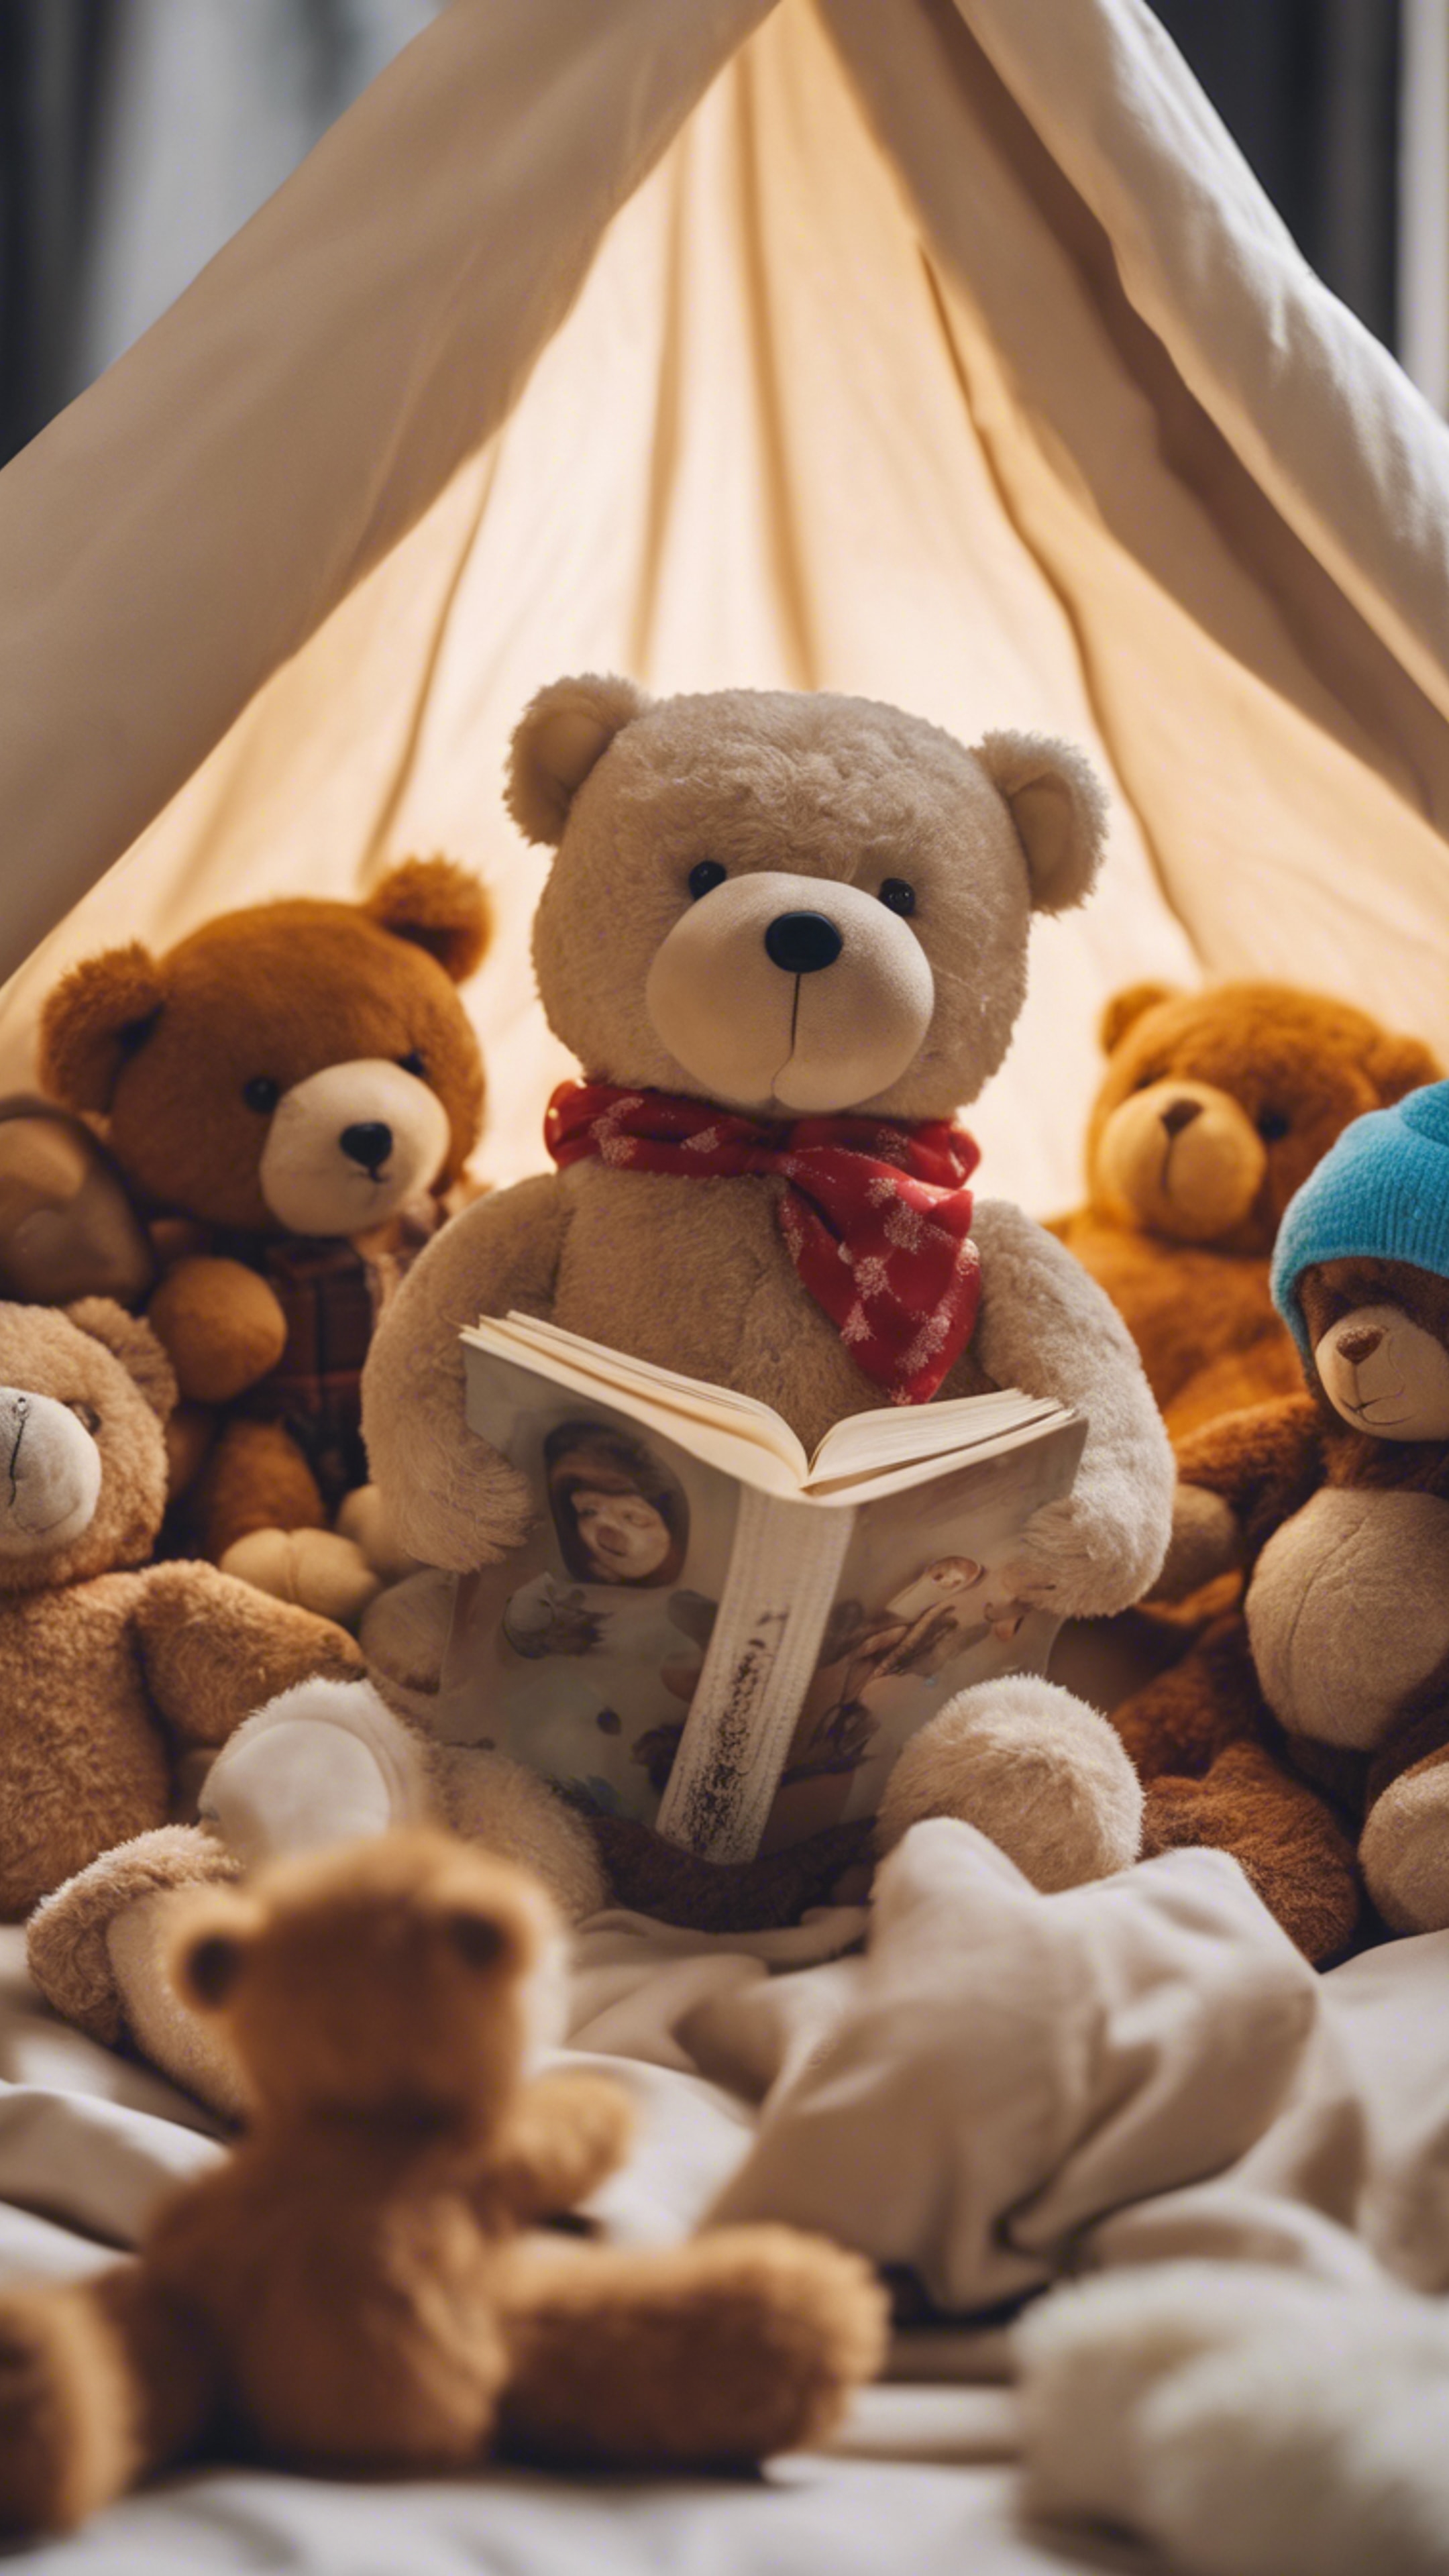 A teddy bear reading a story to a group of animal toys under a blanket fort. Tapeta[8c29e330caea492dba8f]